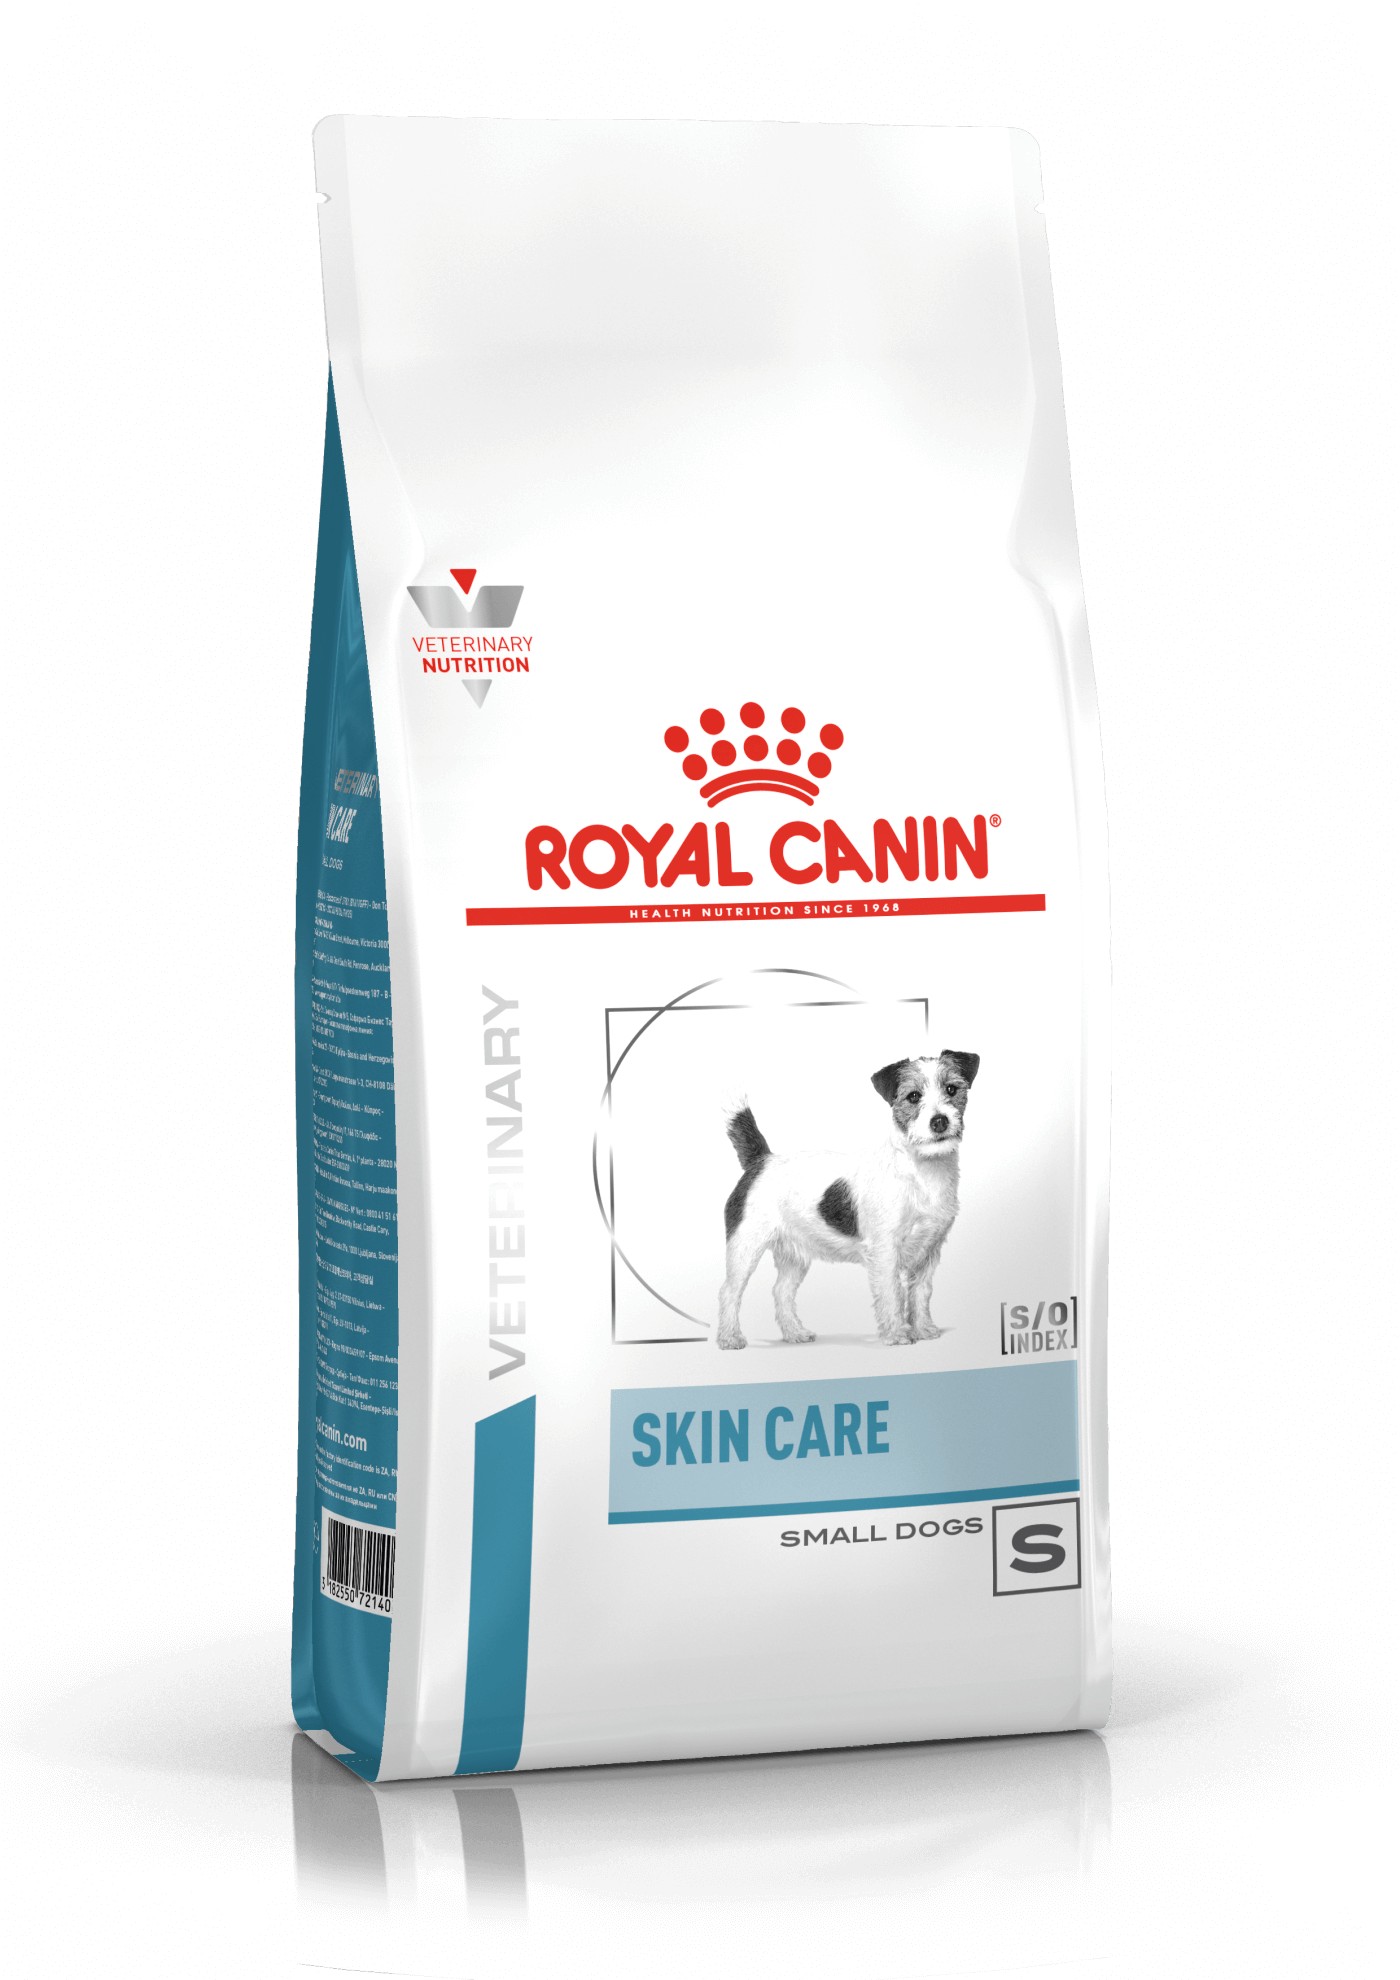 Royal Canin Veterinary Skin Care Small Dogs pour chien